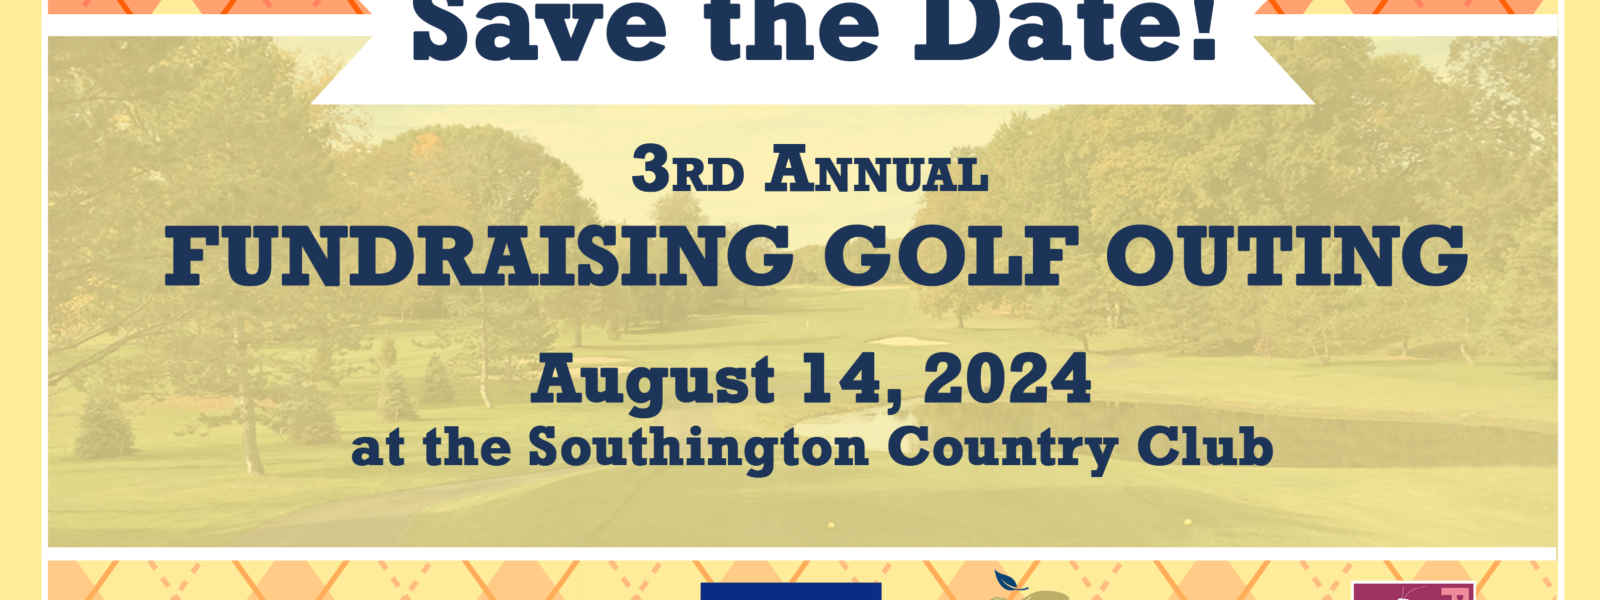 3rd Annual Fundraising Golf Outing